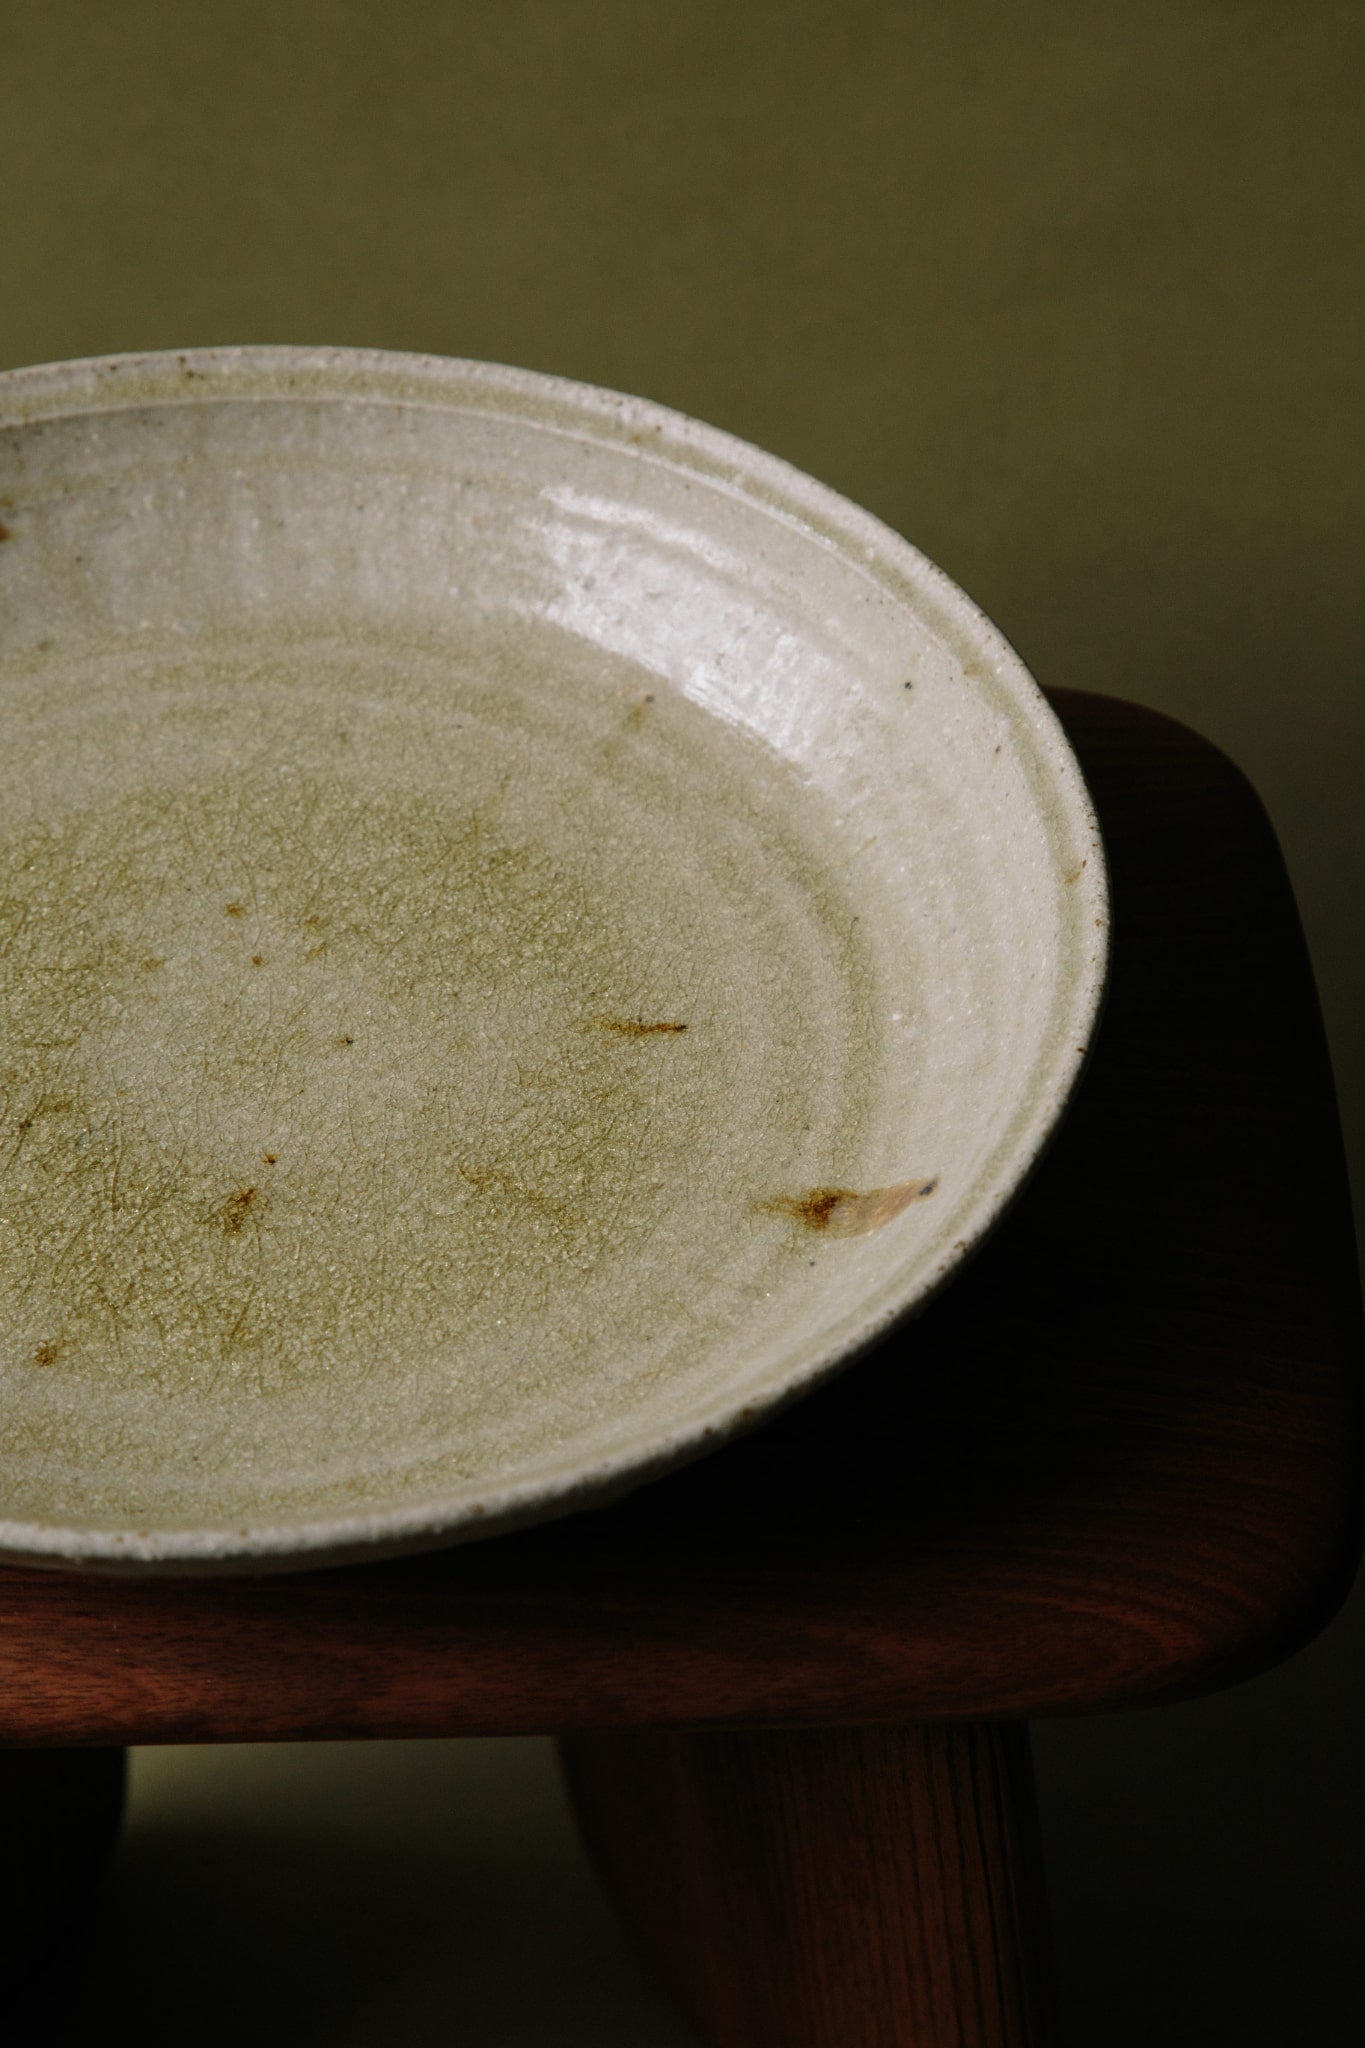 ALT=A fourth angle of the ceramic platter bathed in natural light to highlight the variety in mottling and colour across the suface of the platter.